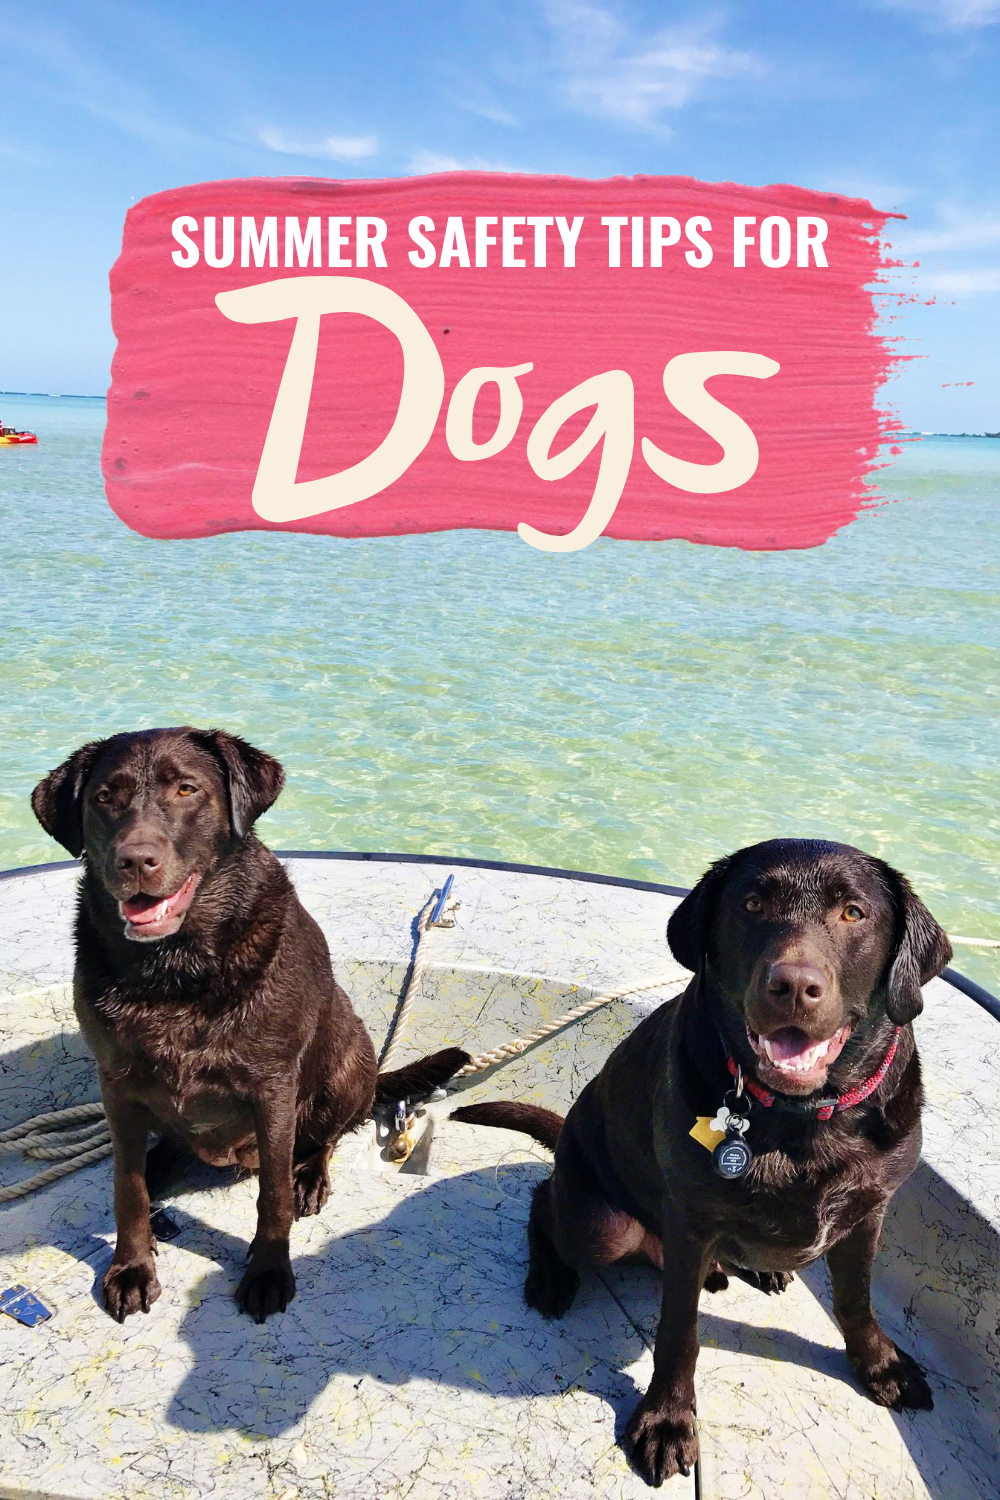 SUMMER SAFETY TIPS FOR DOGS | 6 Summer Safety Tips For Dogs - Tips for Dog Owners - Tips For Summer - Labrador Retriever